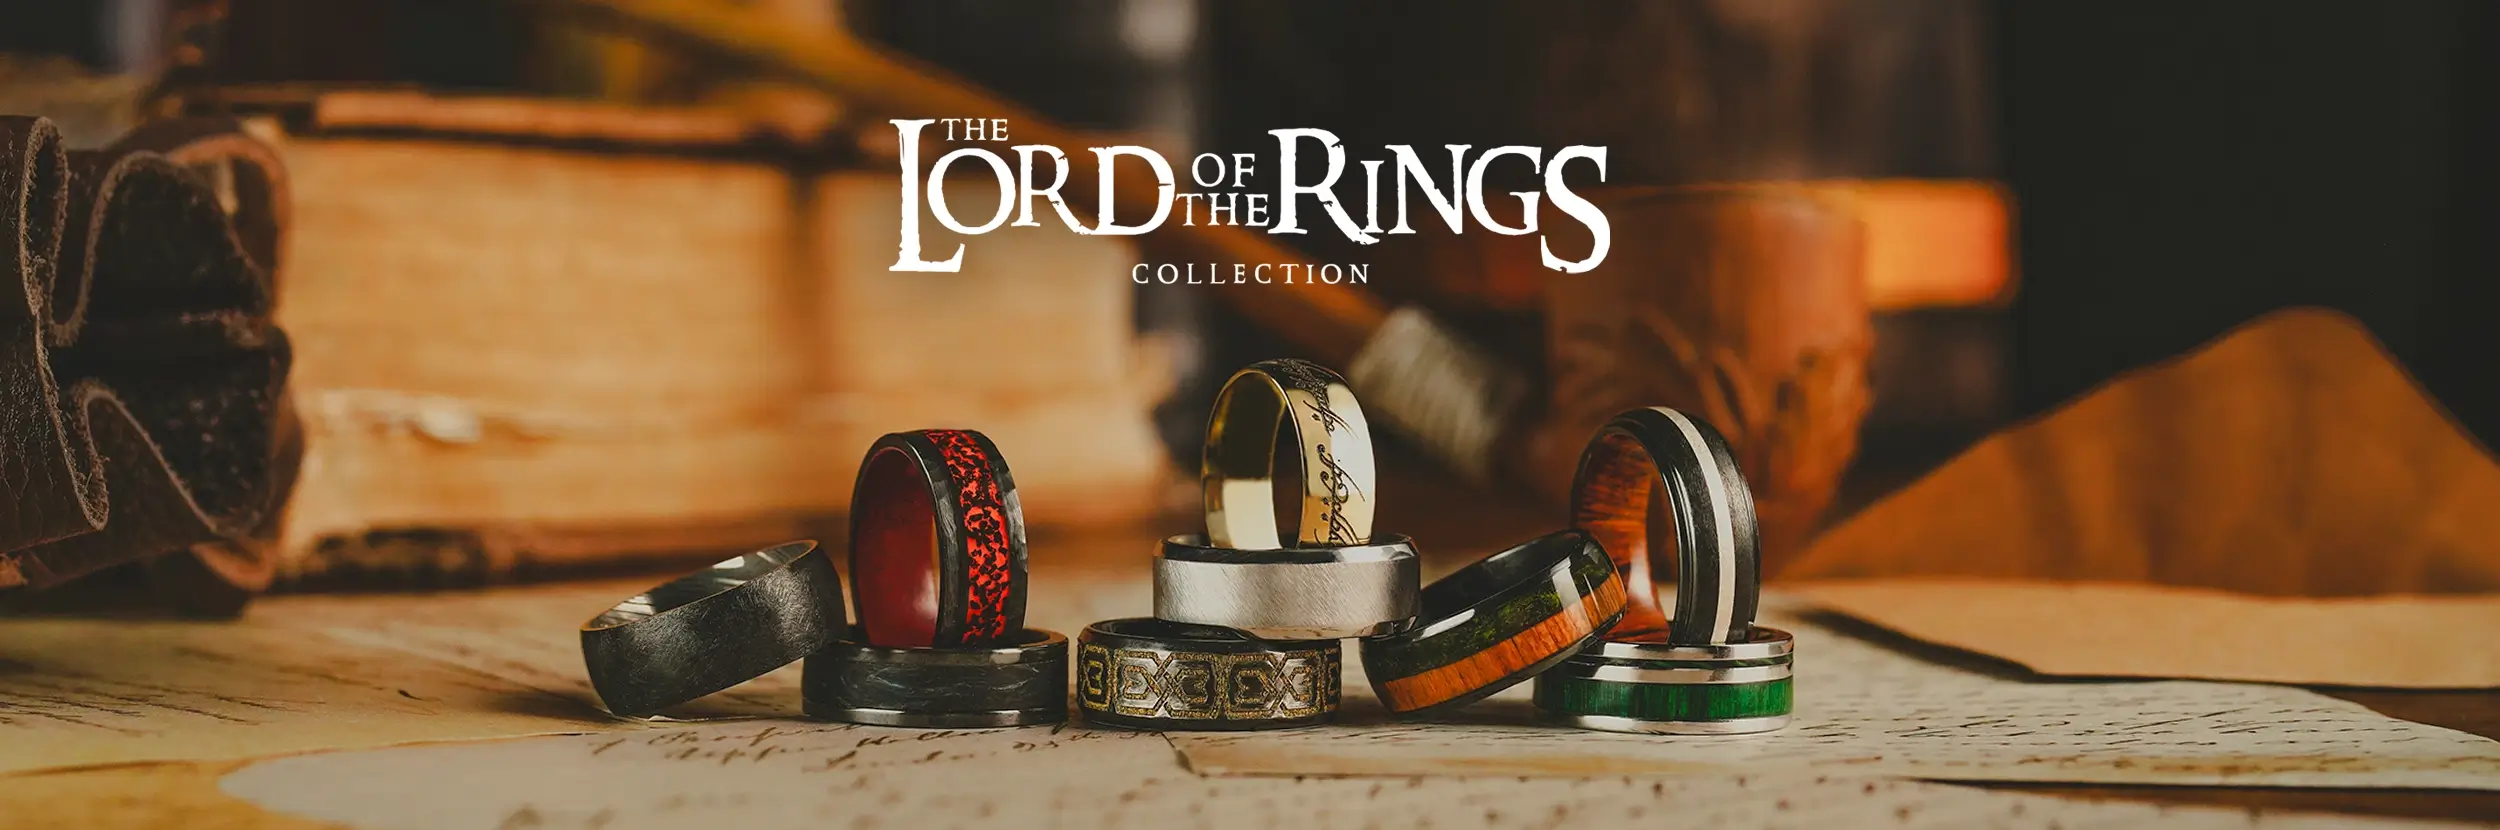 Amazon.com: The Lord of the Rings Collection (Theatrical Version) :  Various, Various: Movies & TV